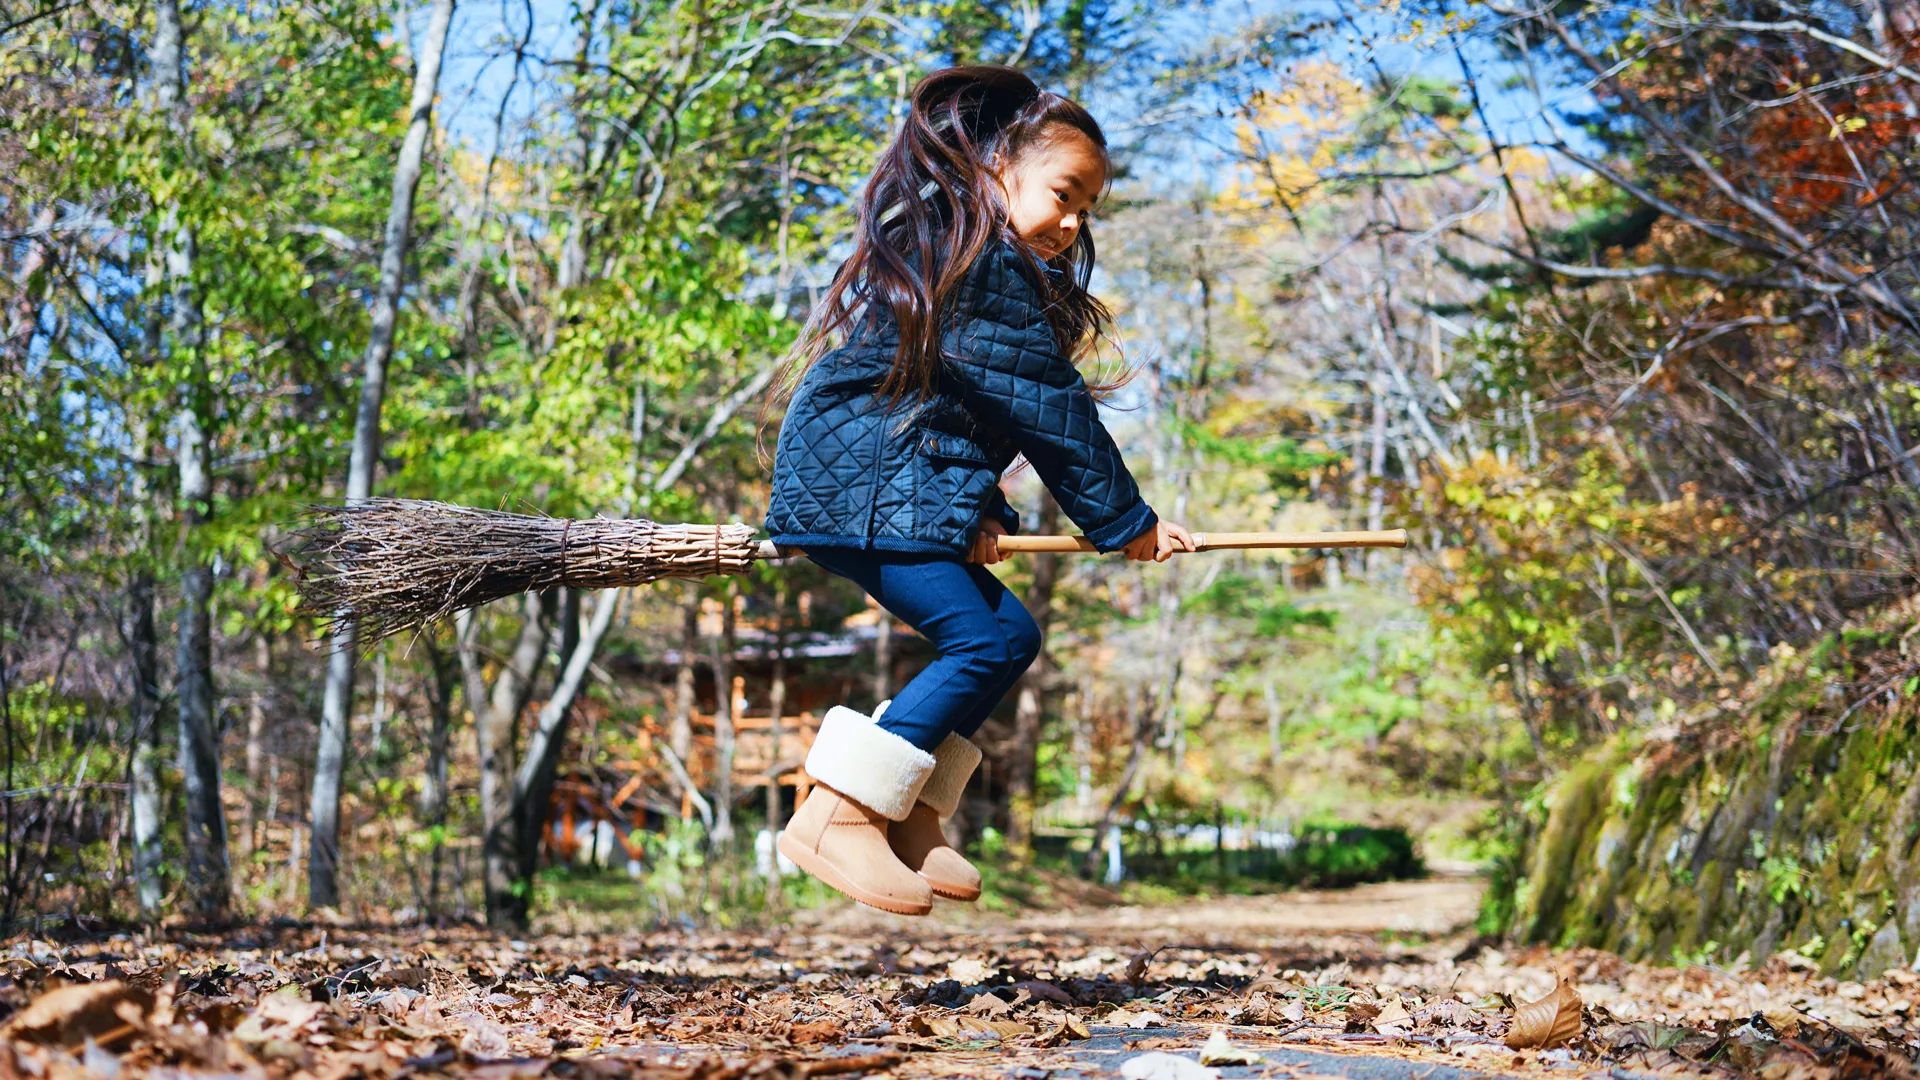 A photo of a little girl riding a broom stick in a forest